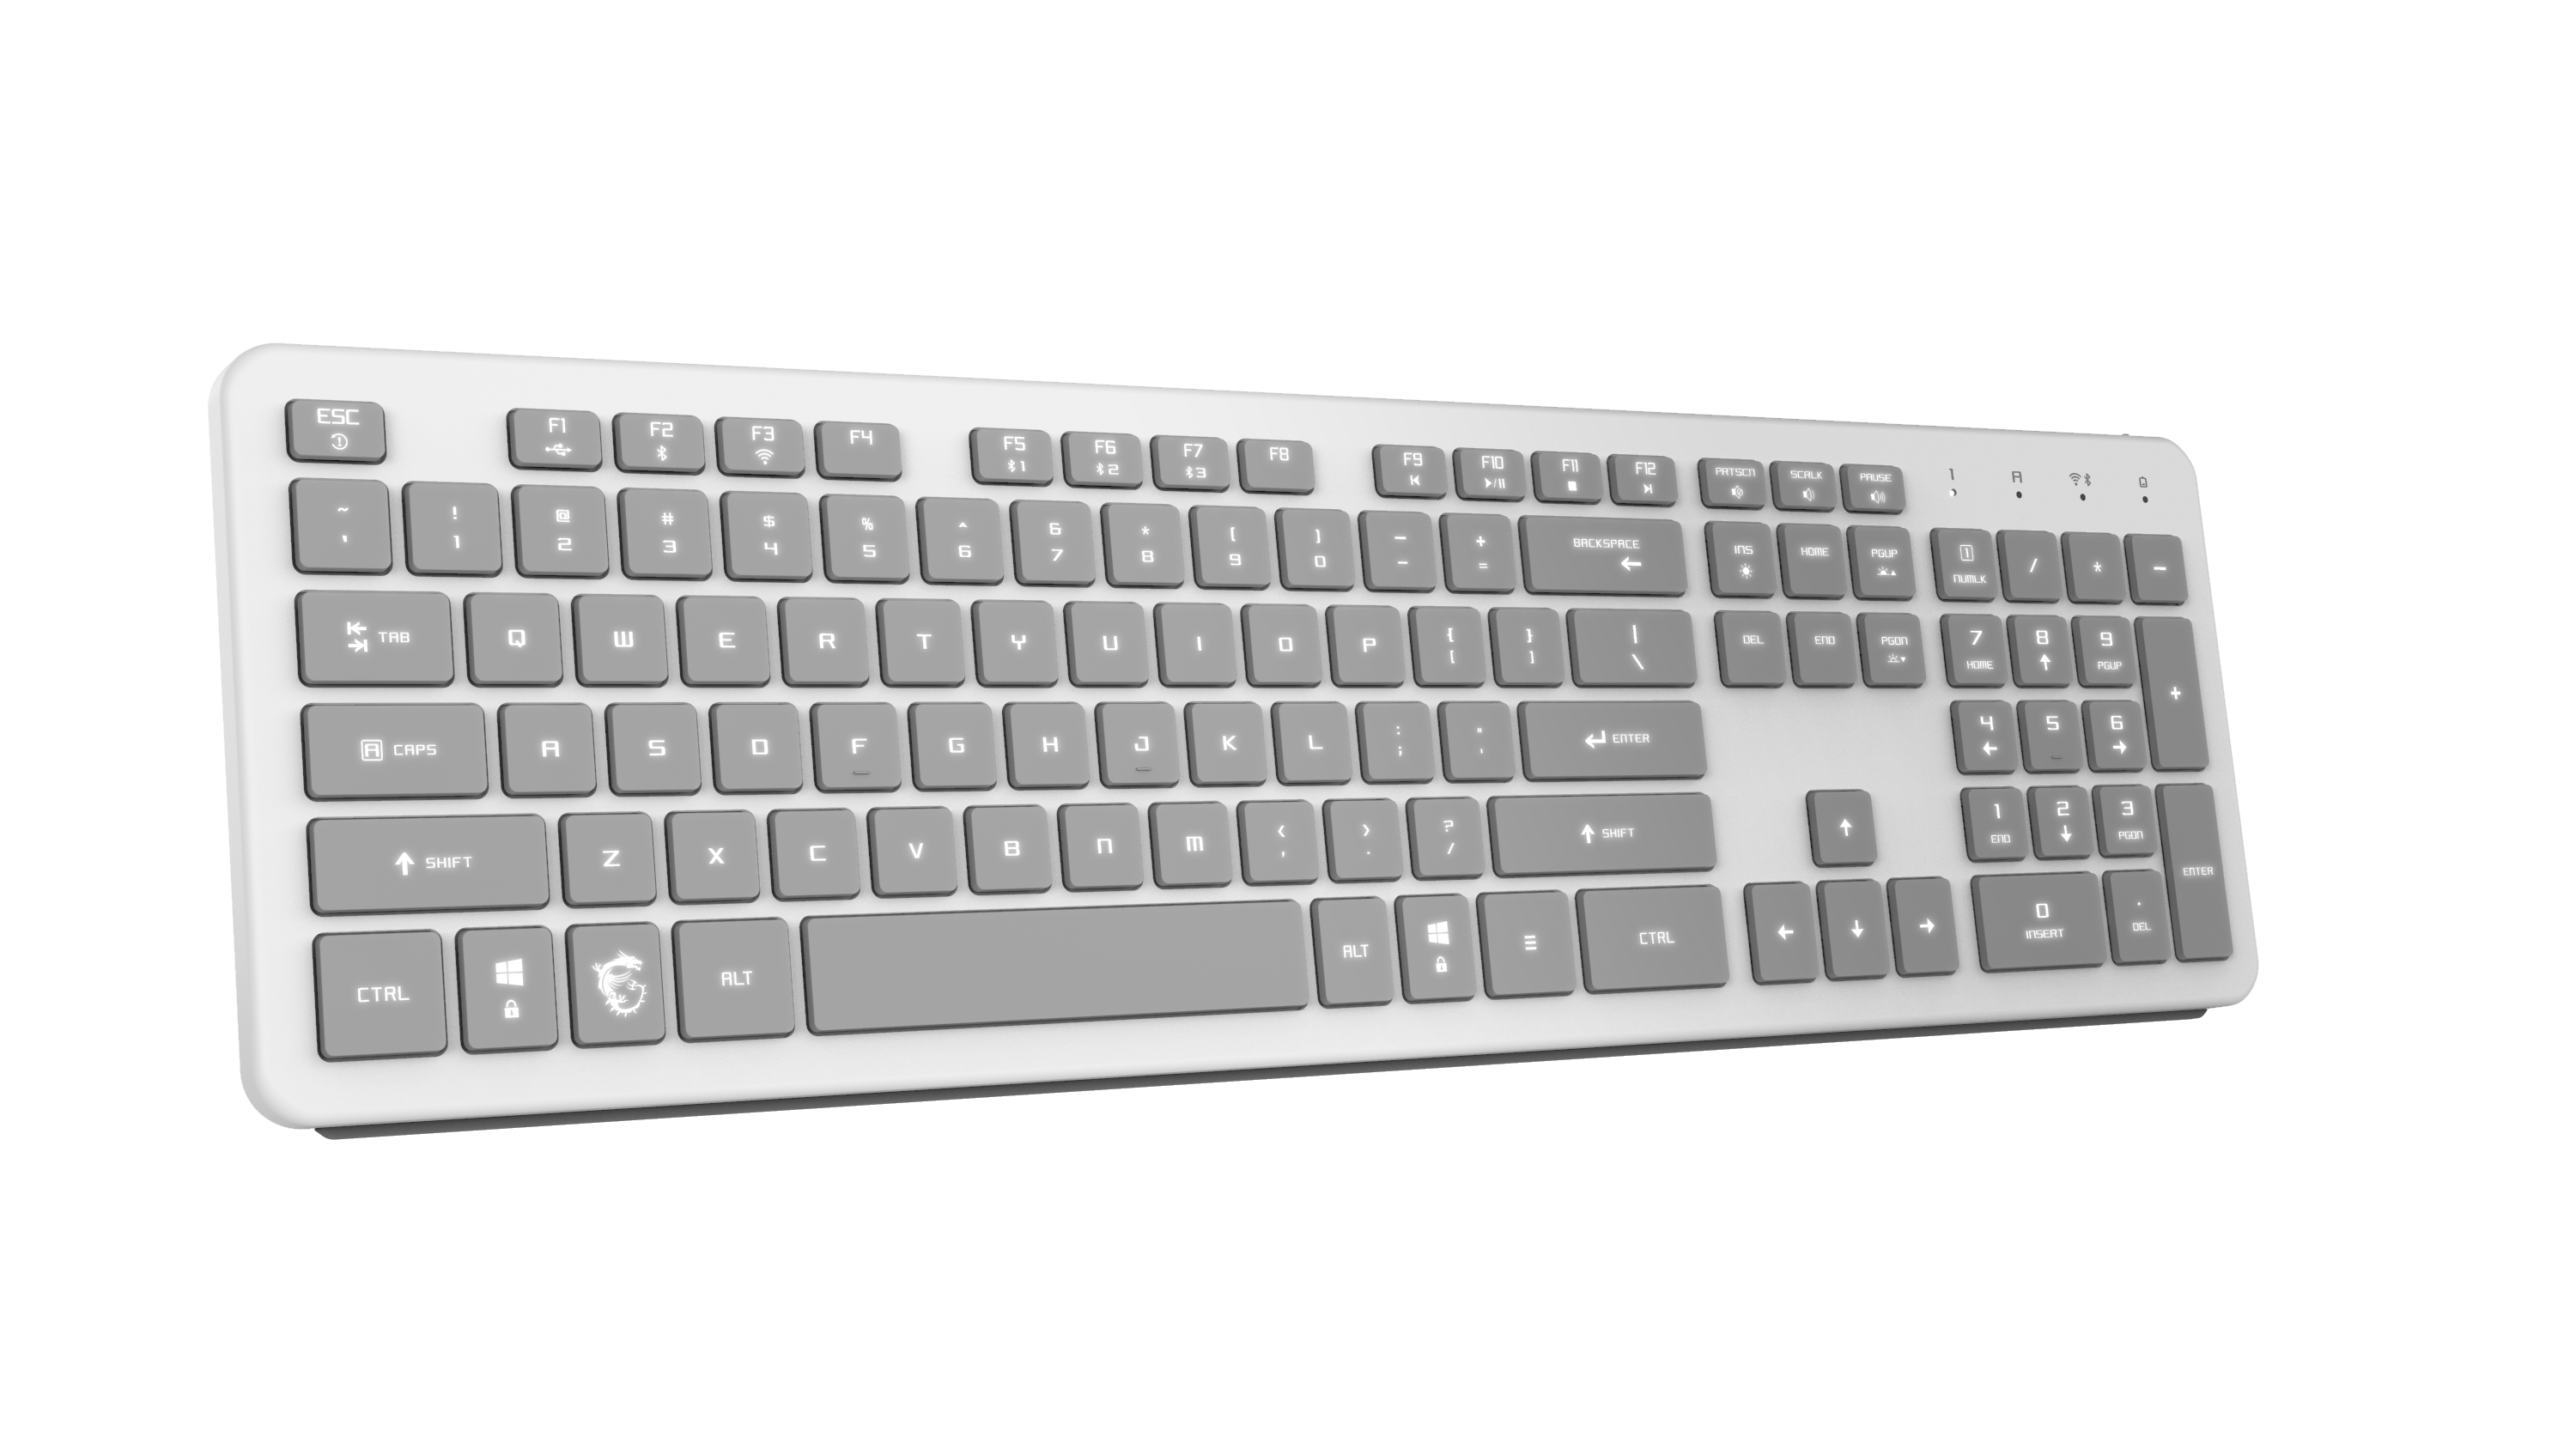 MSI CES 2020 Creation CK40 Keyboard Product Image